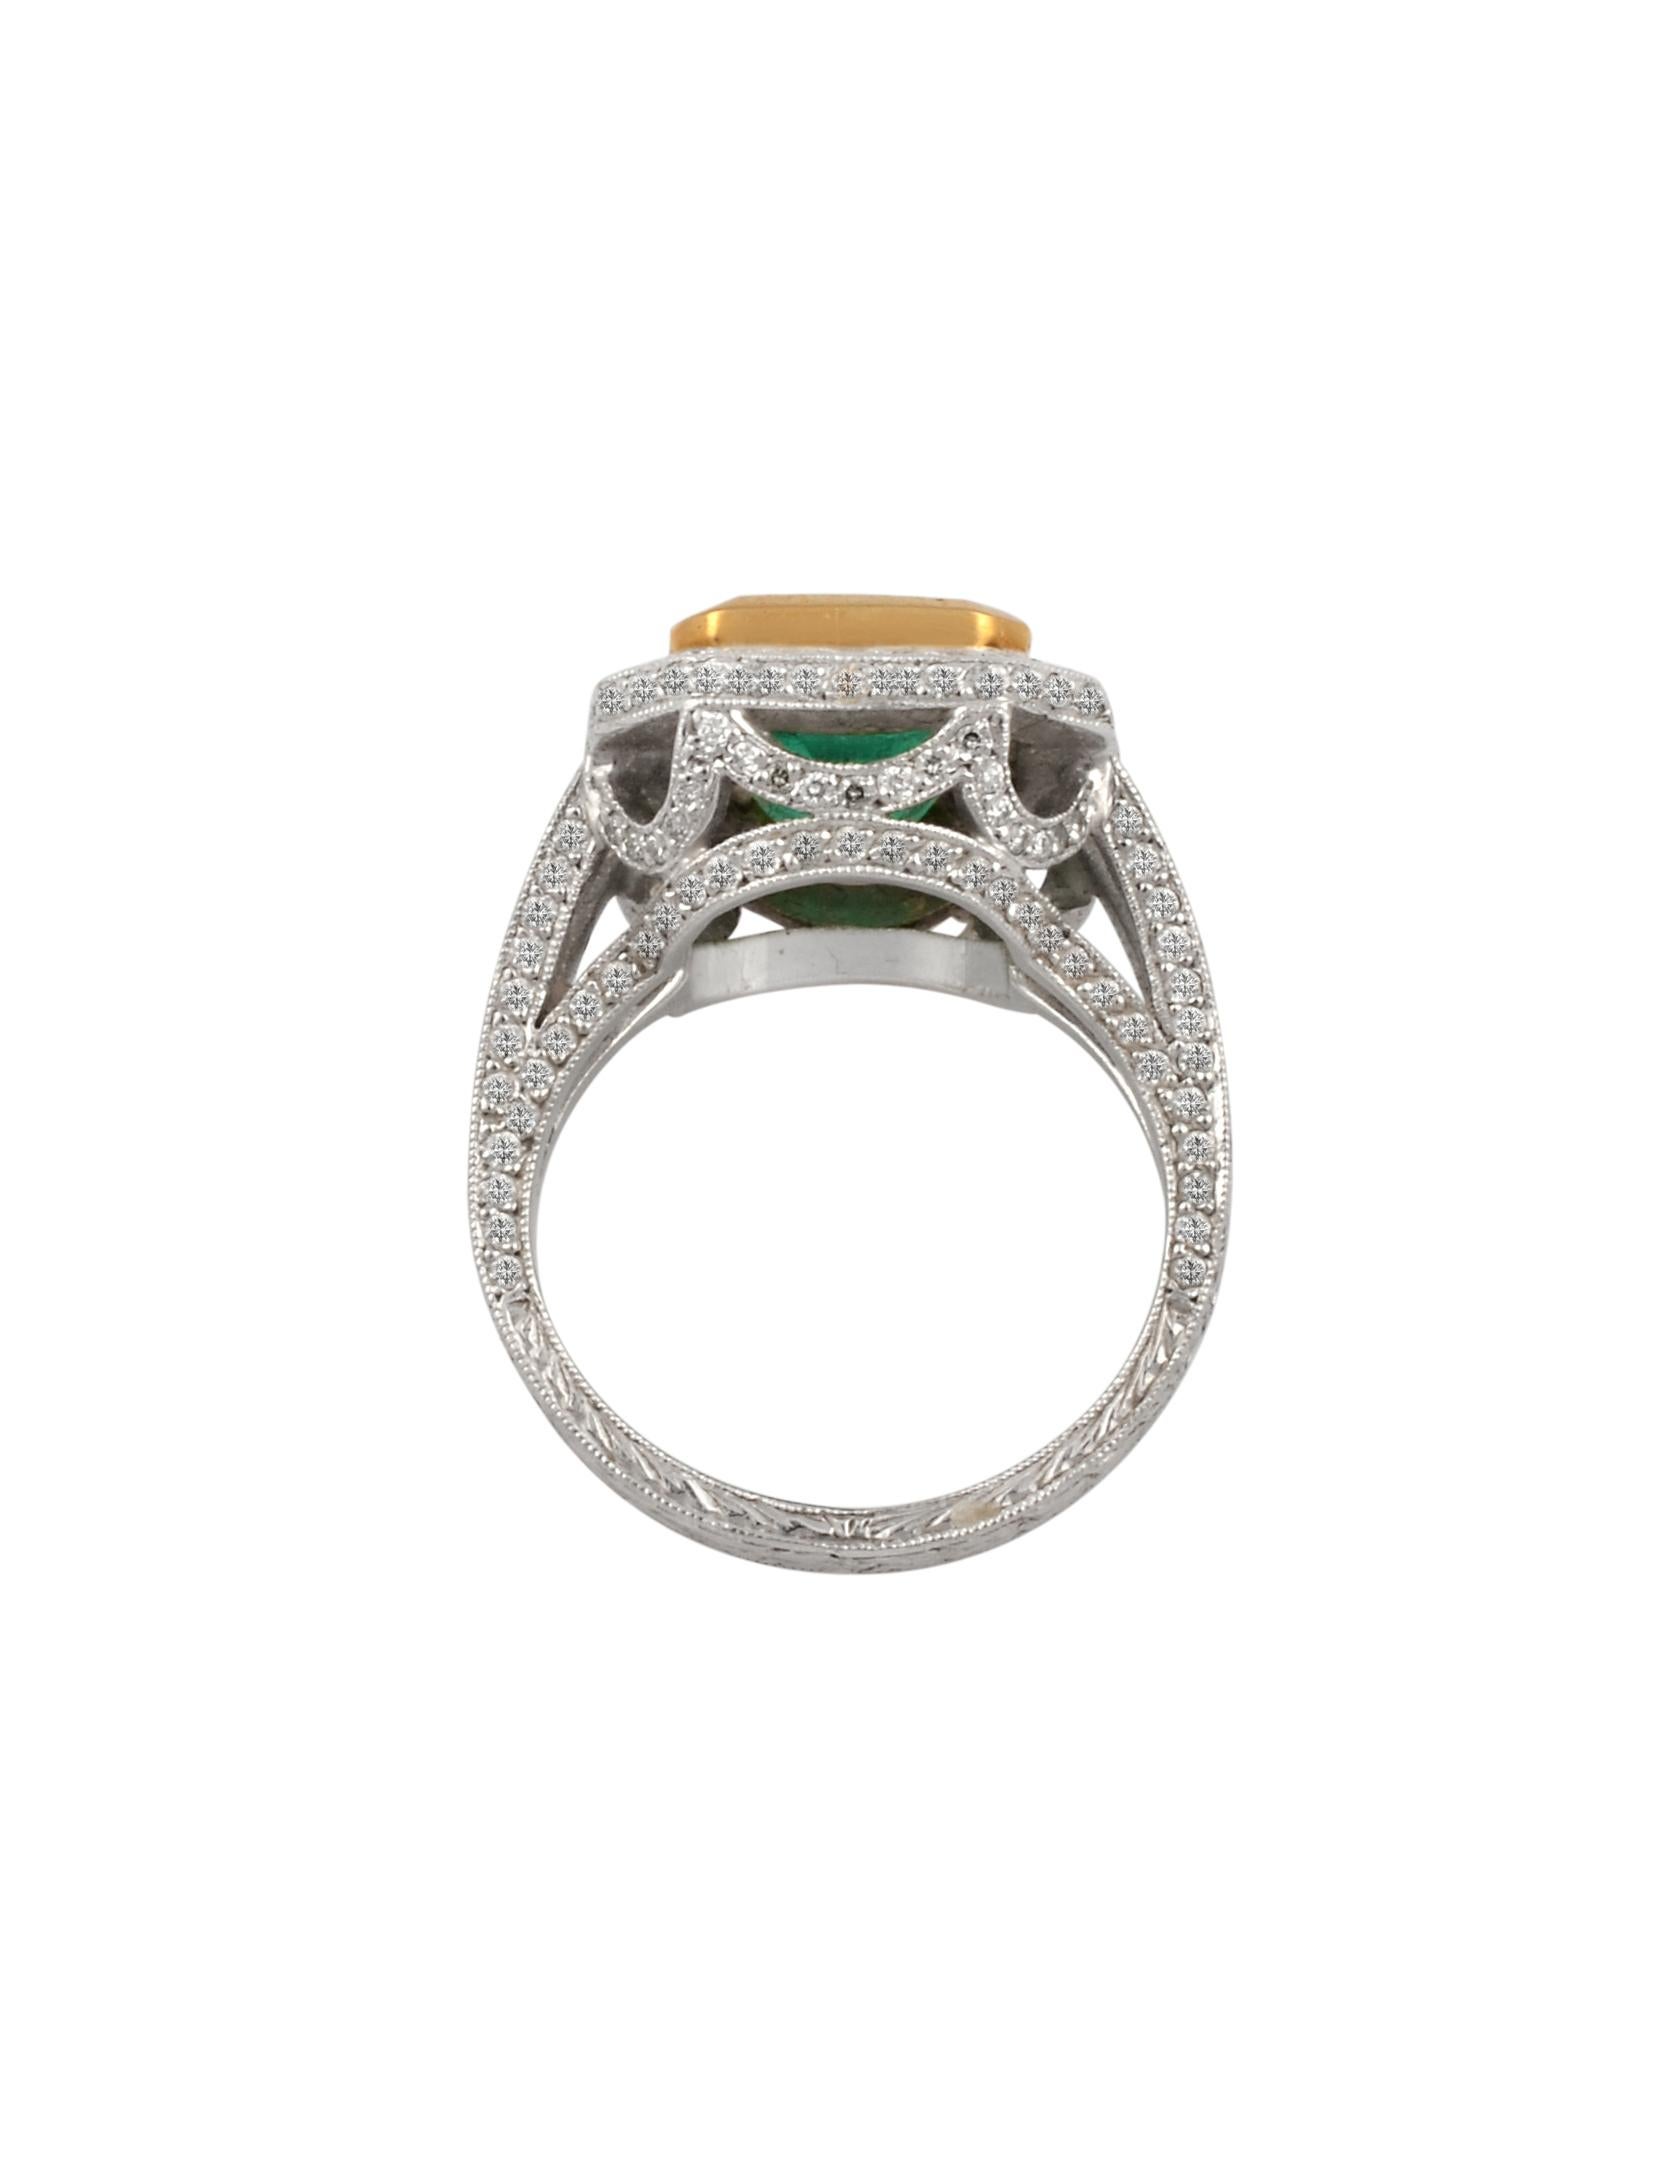 3.8 Carat Emerald Cut Colombian Emerald and Diamond Ring Platinum, Two-Tone 4